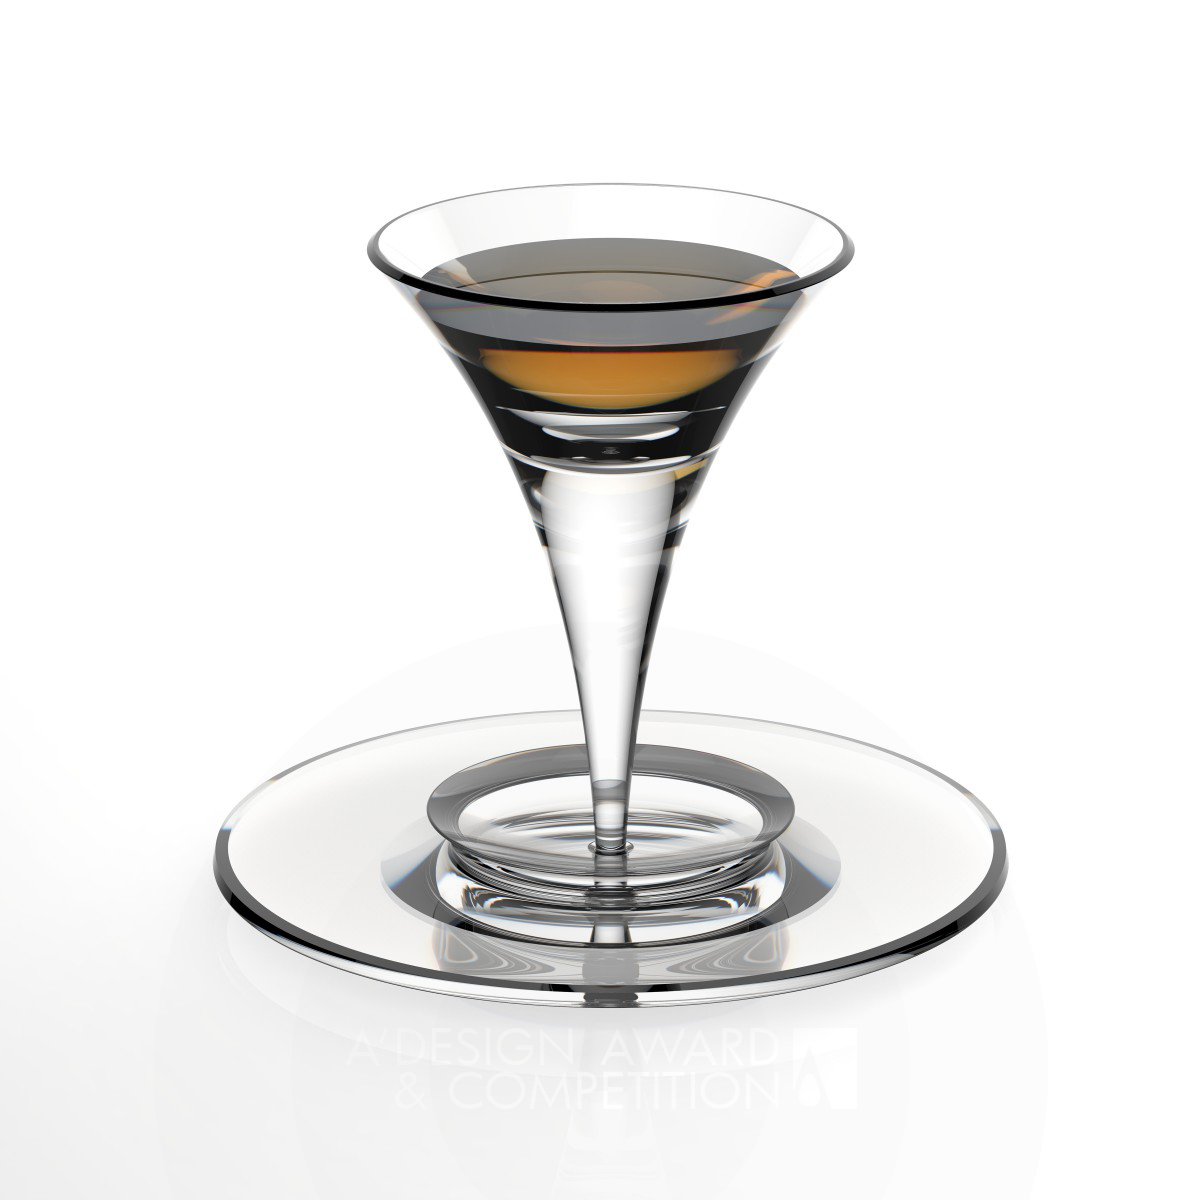 Rendezvous Stemware by Adele Rehkemper and Cliff Shin